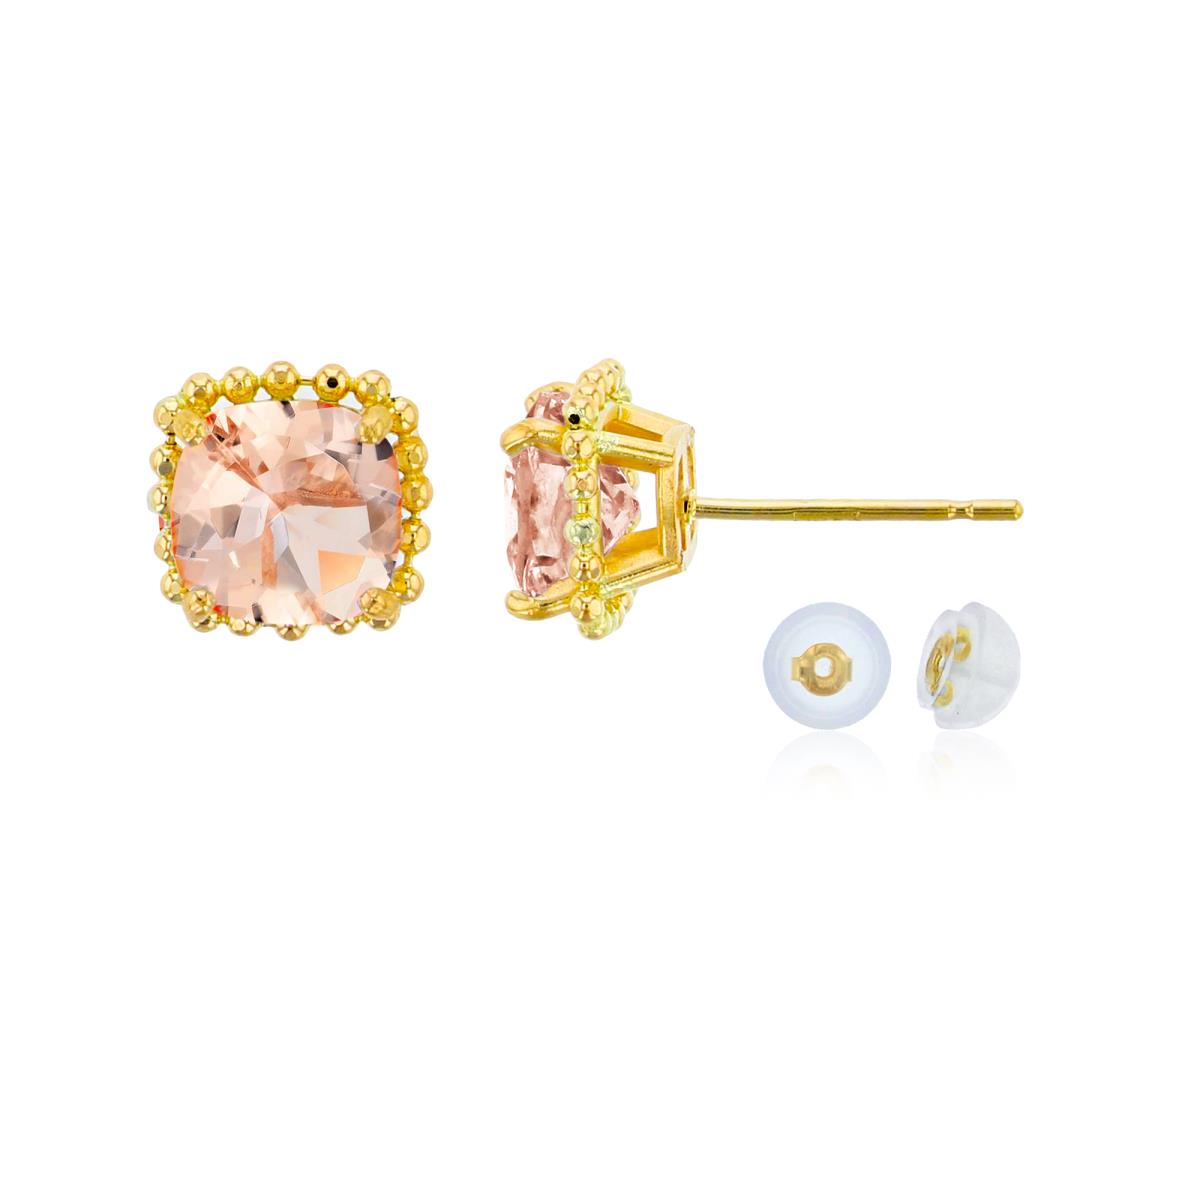 14K Yellow Gold 6x6mm Cushion Cut Morganite Bead Frame Stud Earring with Silicone Back